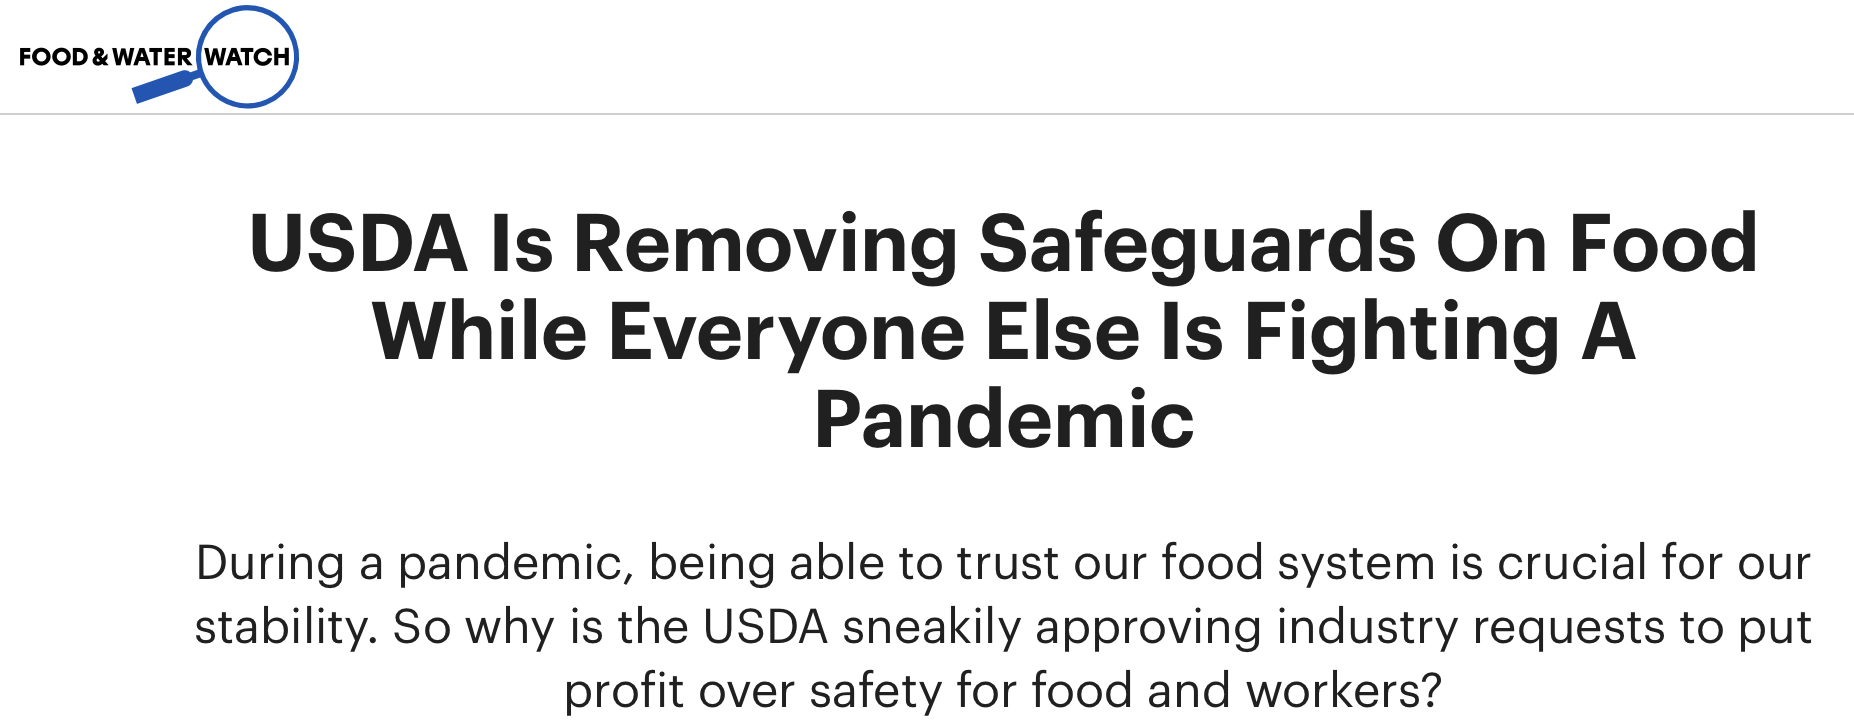 [url] https://www.foodandwaterwatch.org/news/usda-removing-safeguards-food-while-everyone-else-fighting-pandemic[/url]